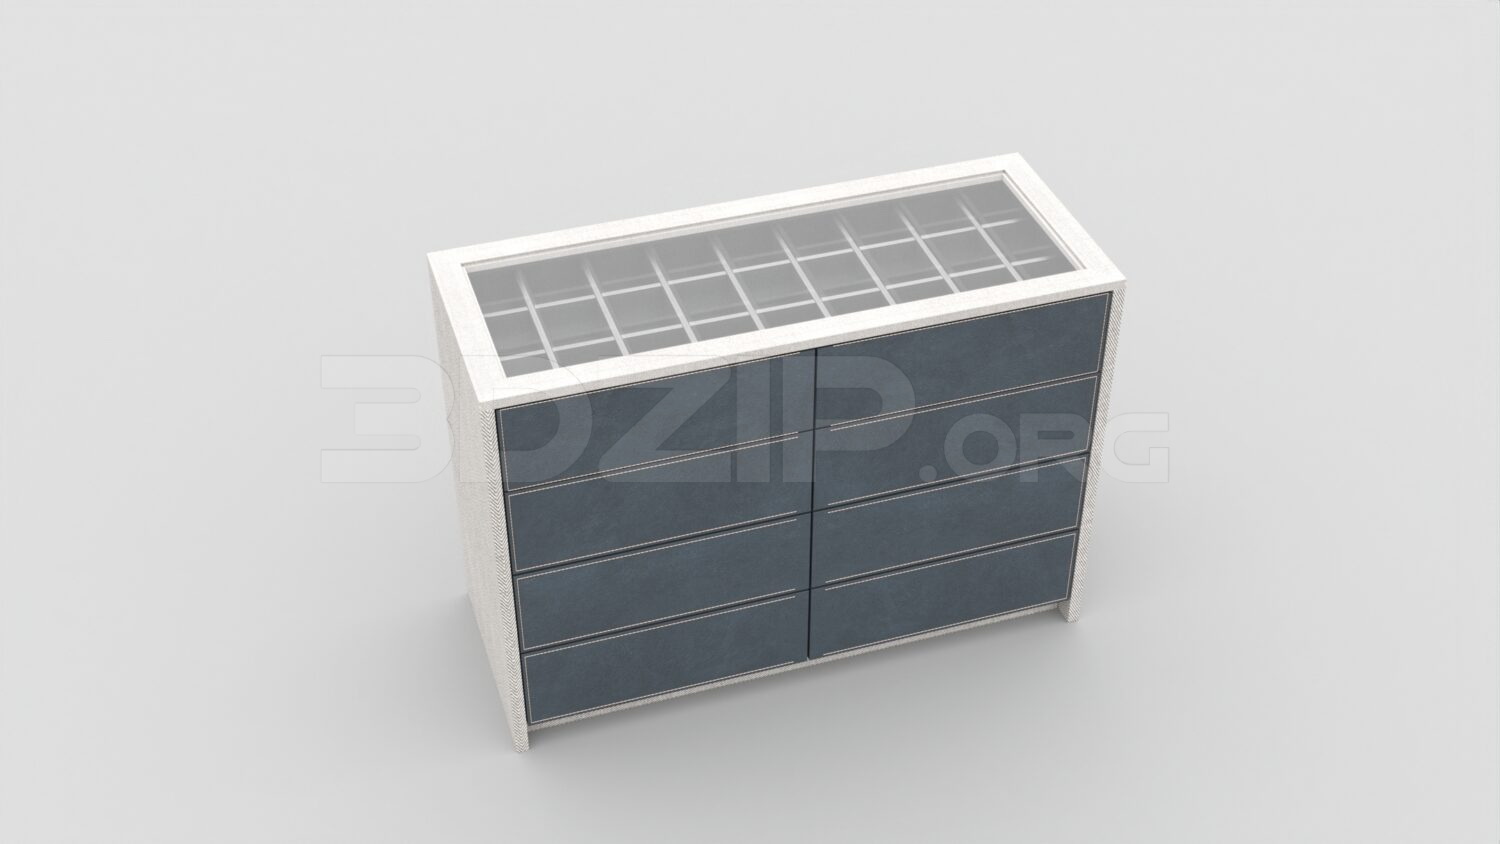 1189. Download Free Display Cabinets Model By Nam Tran